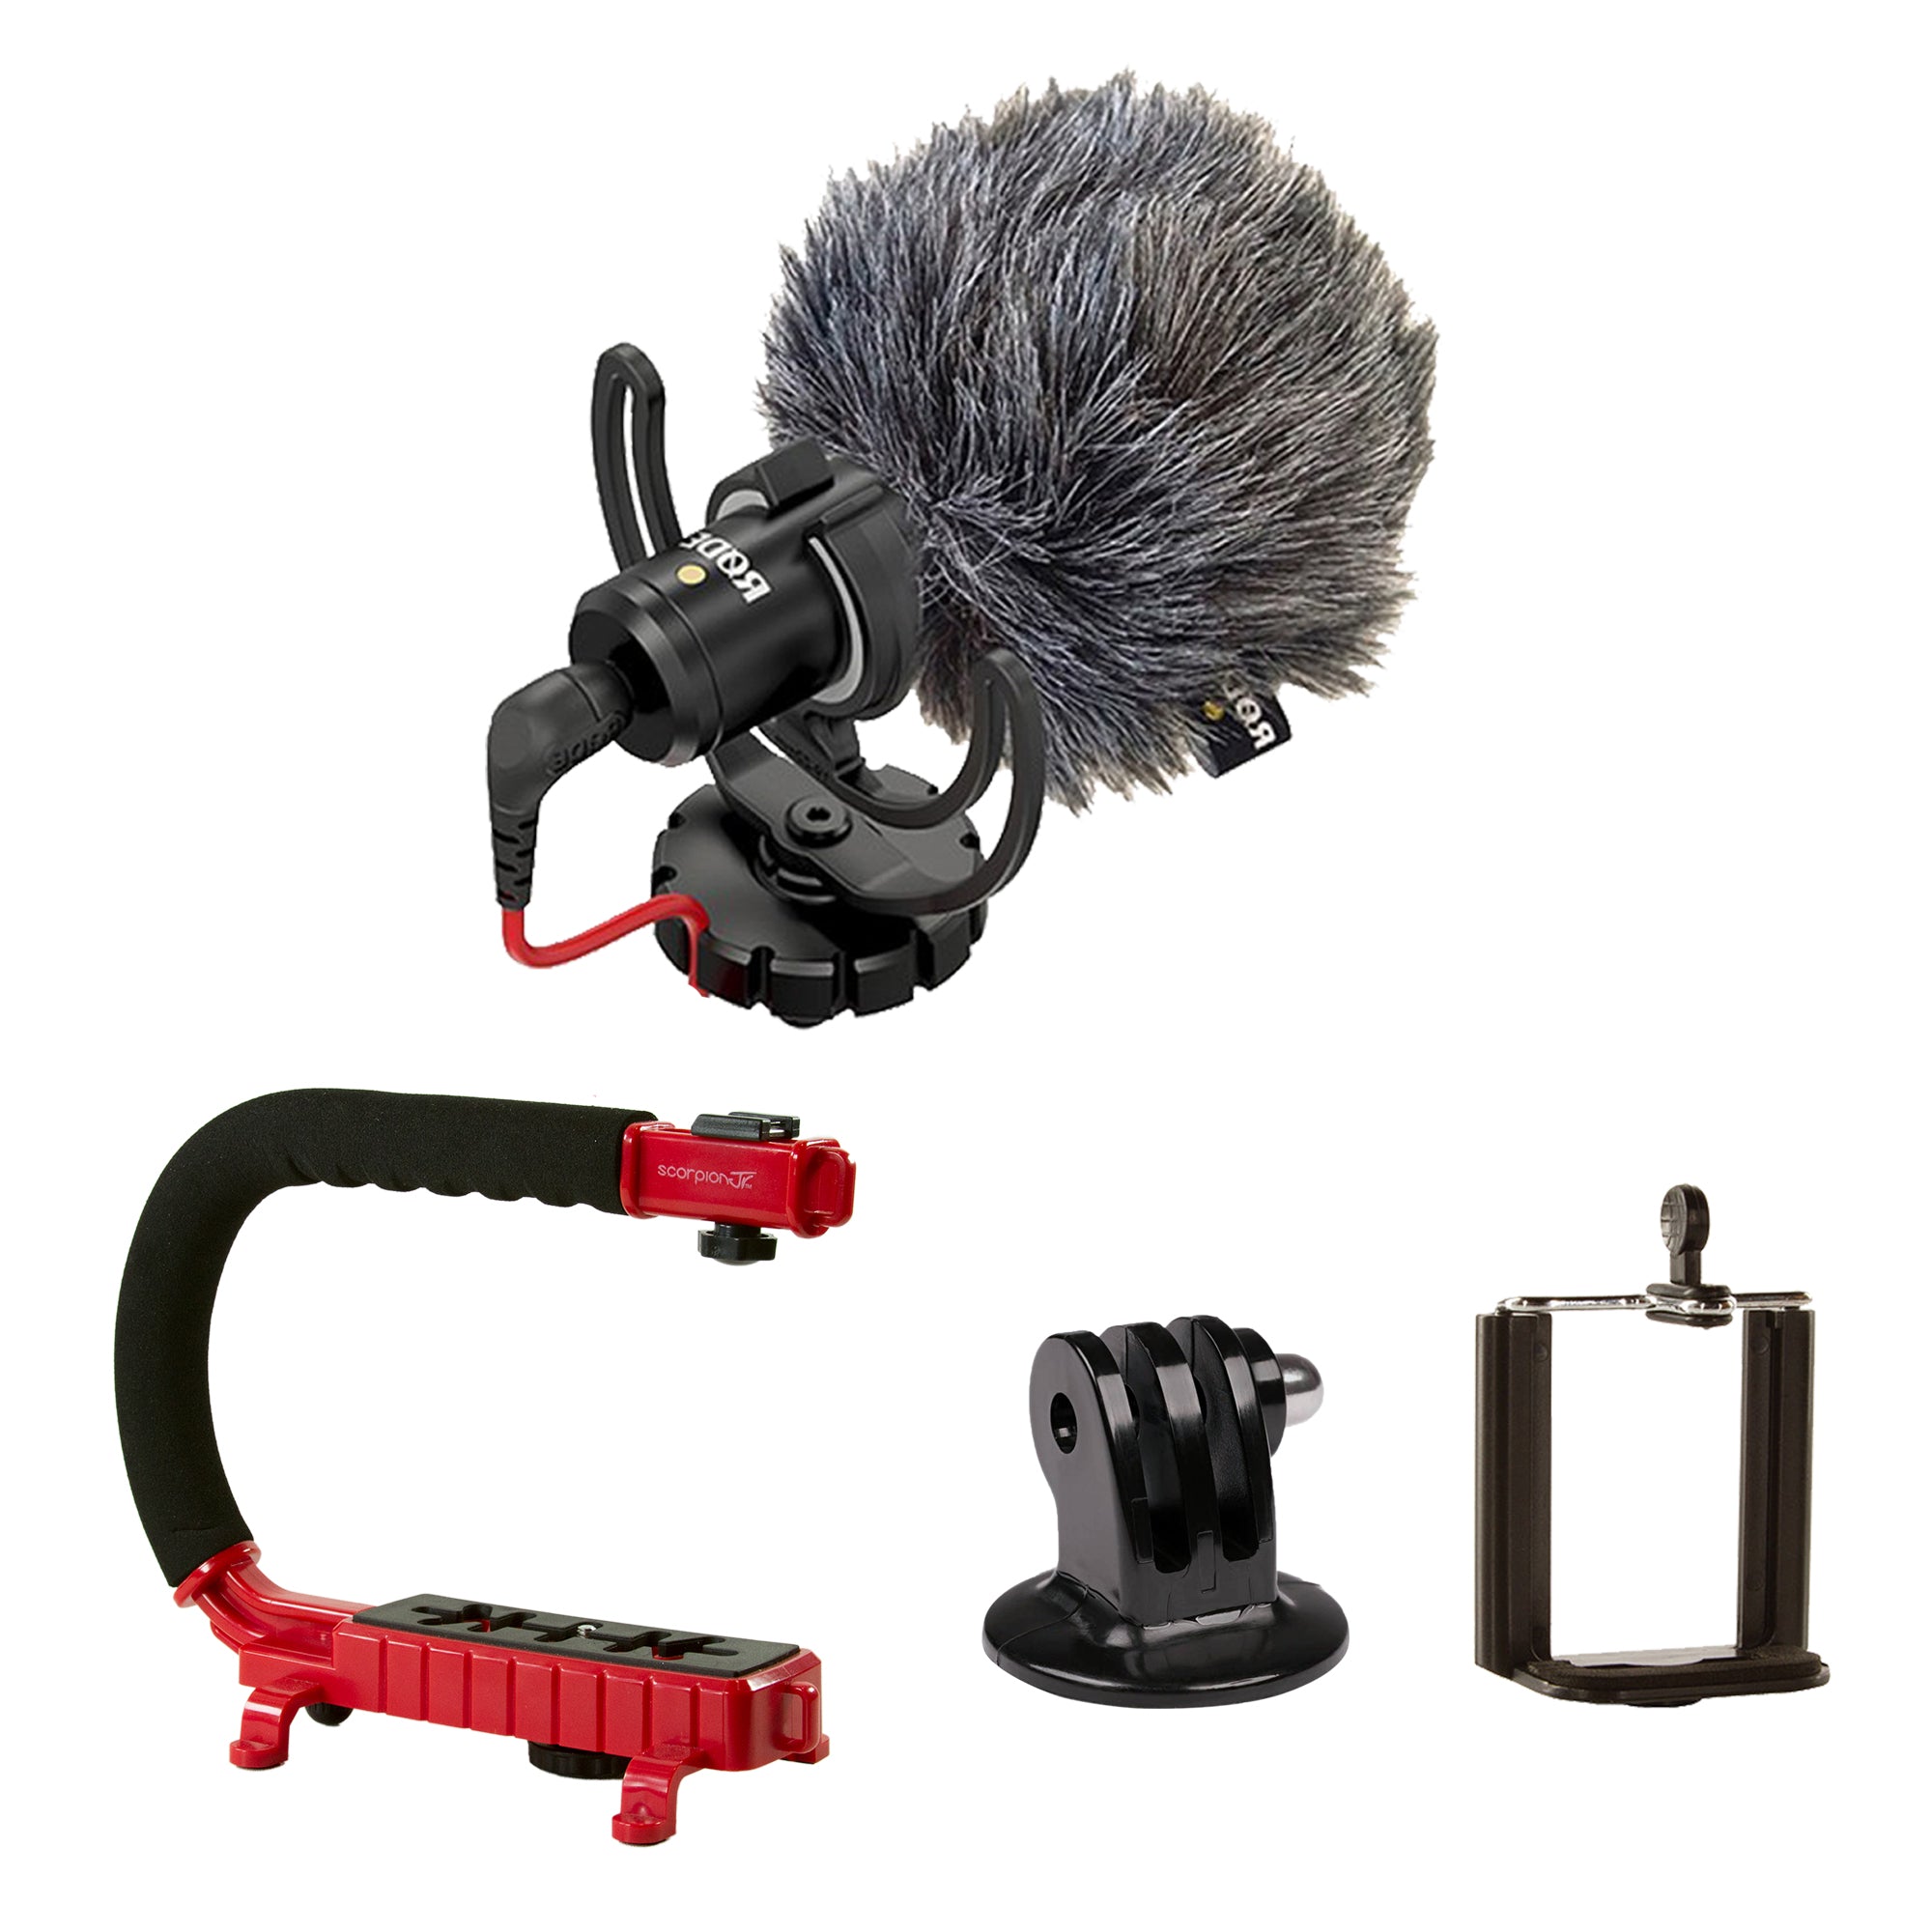 Rode VideoMicro Compact On-Camera Microphone with Red Lyre